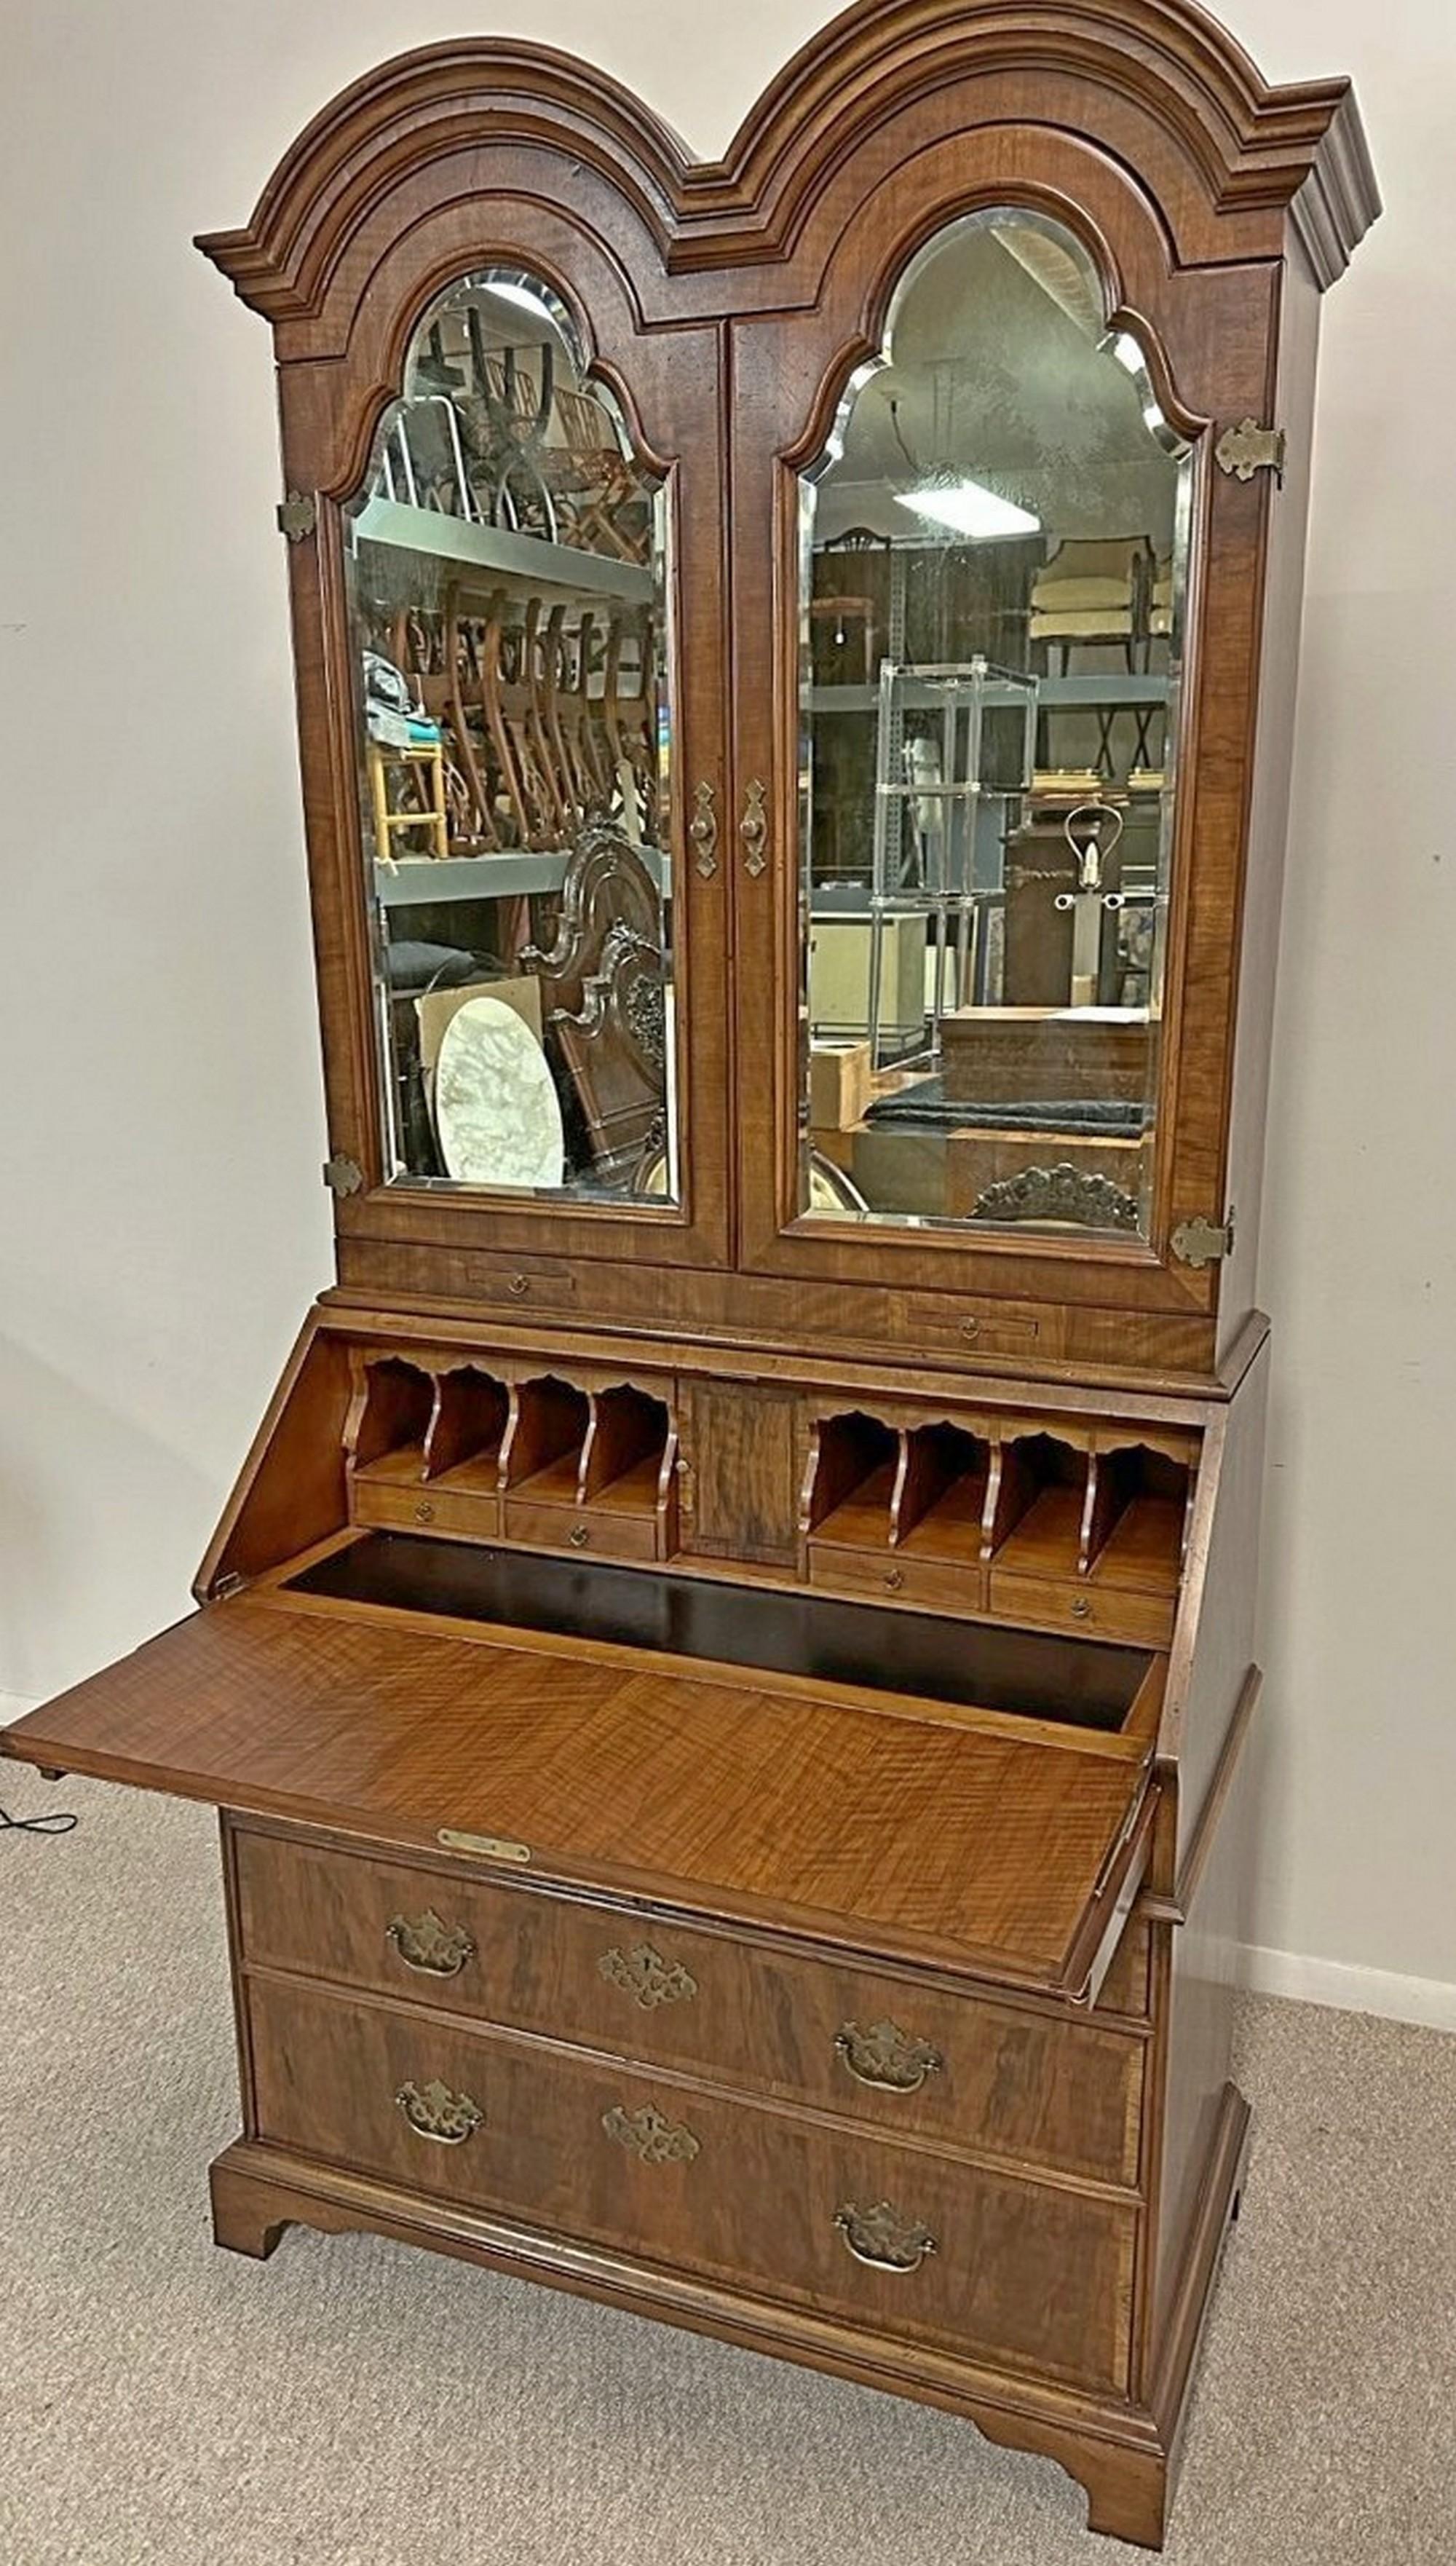 John Widdicomb Chippendale Style Secretary Desk. circa 20th century. A two-piece slant front walnut Chippendale desk model #2086. Banded wood inlay on two full sized drawers and drop front with leather writing surface. Leather desktop slides away to